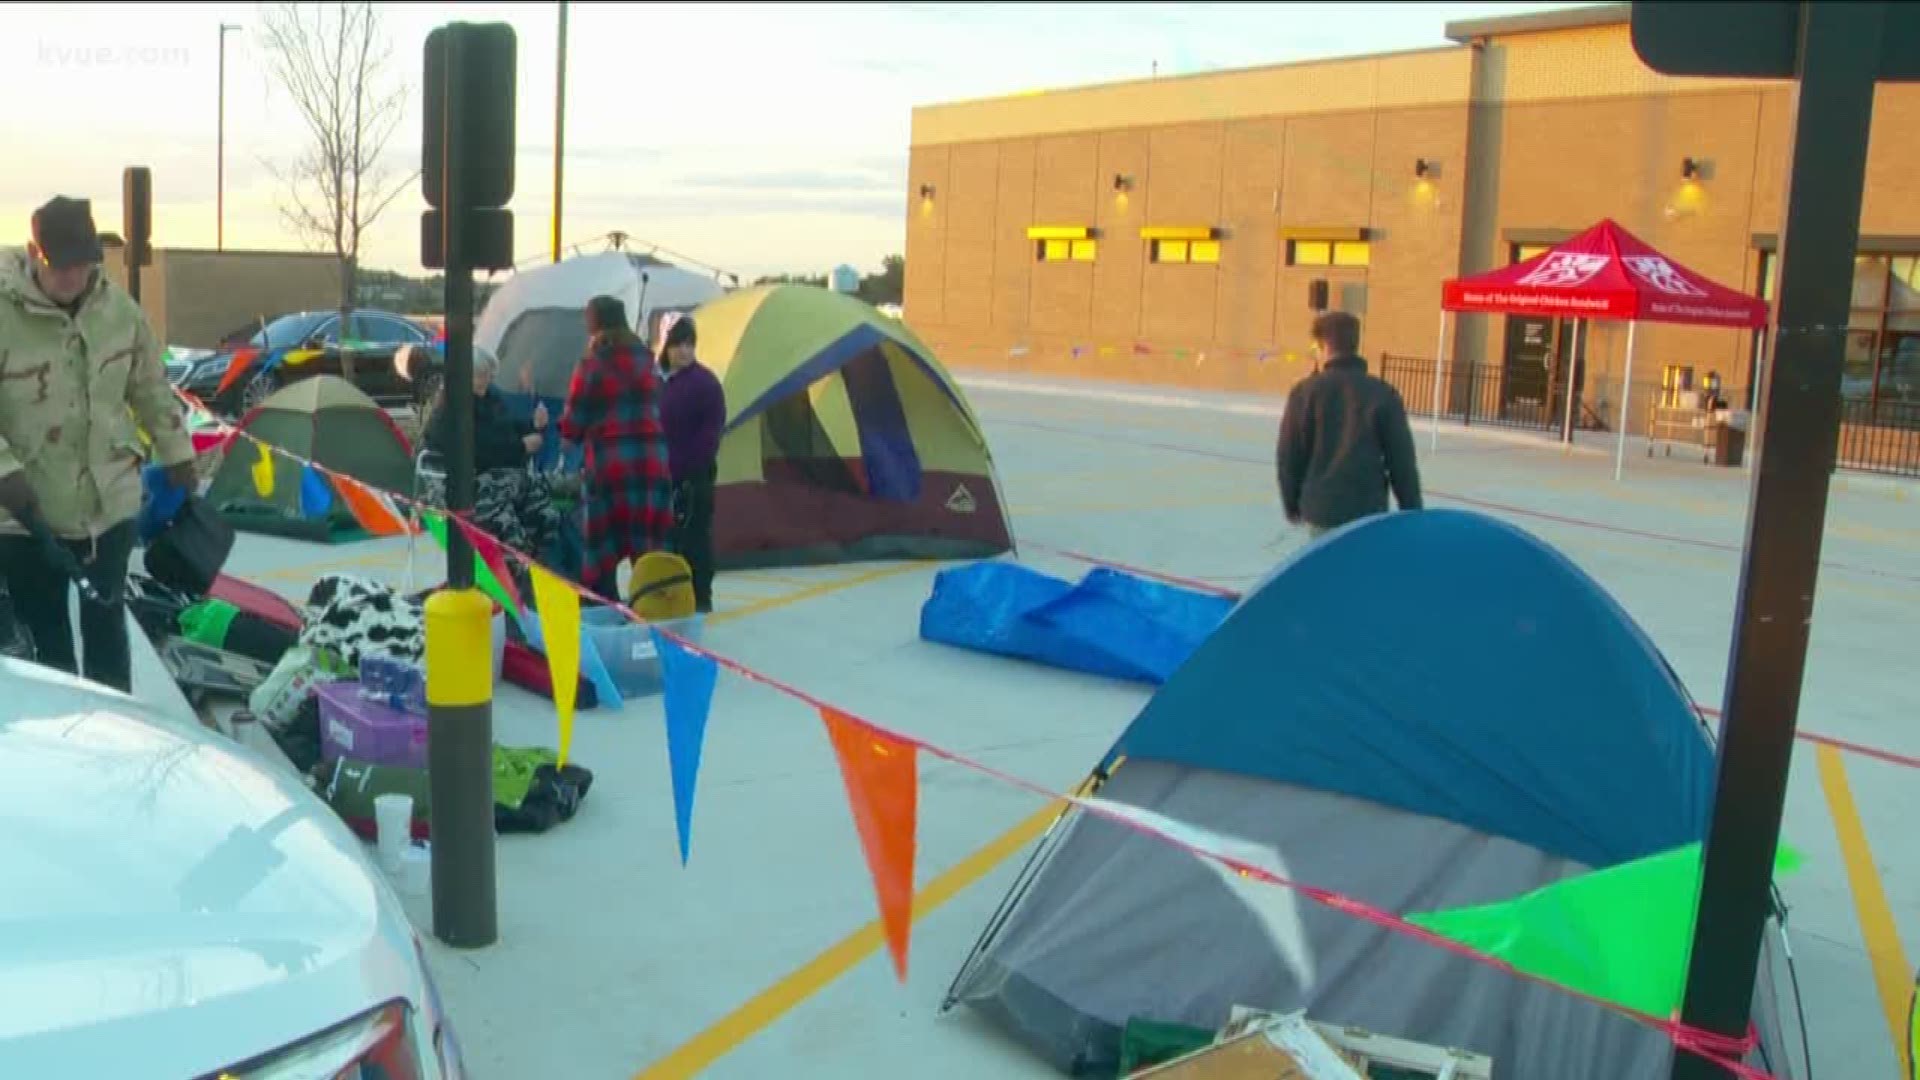 People are prepared to camp out until 6 a.m. Thursday morning for a free year of Chick-fil-A.
This contest is ahead of the store opening a new Austin location.